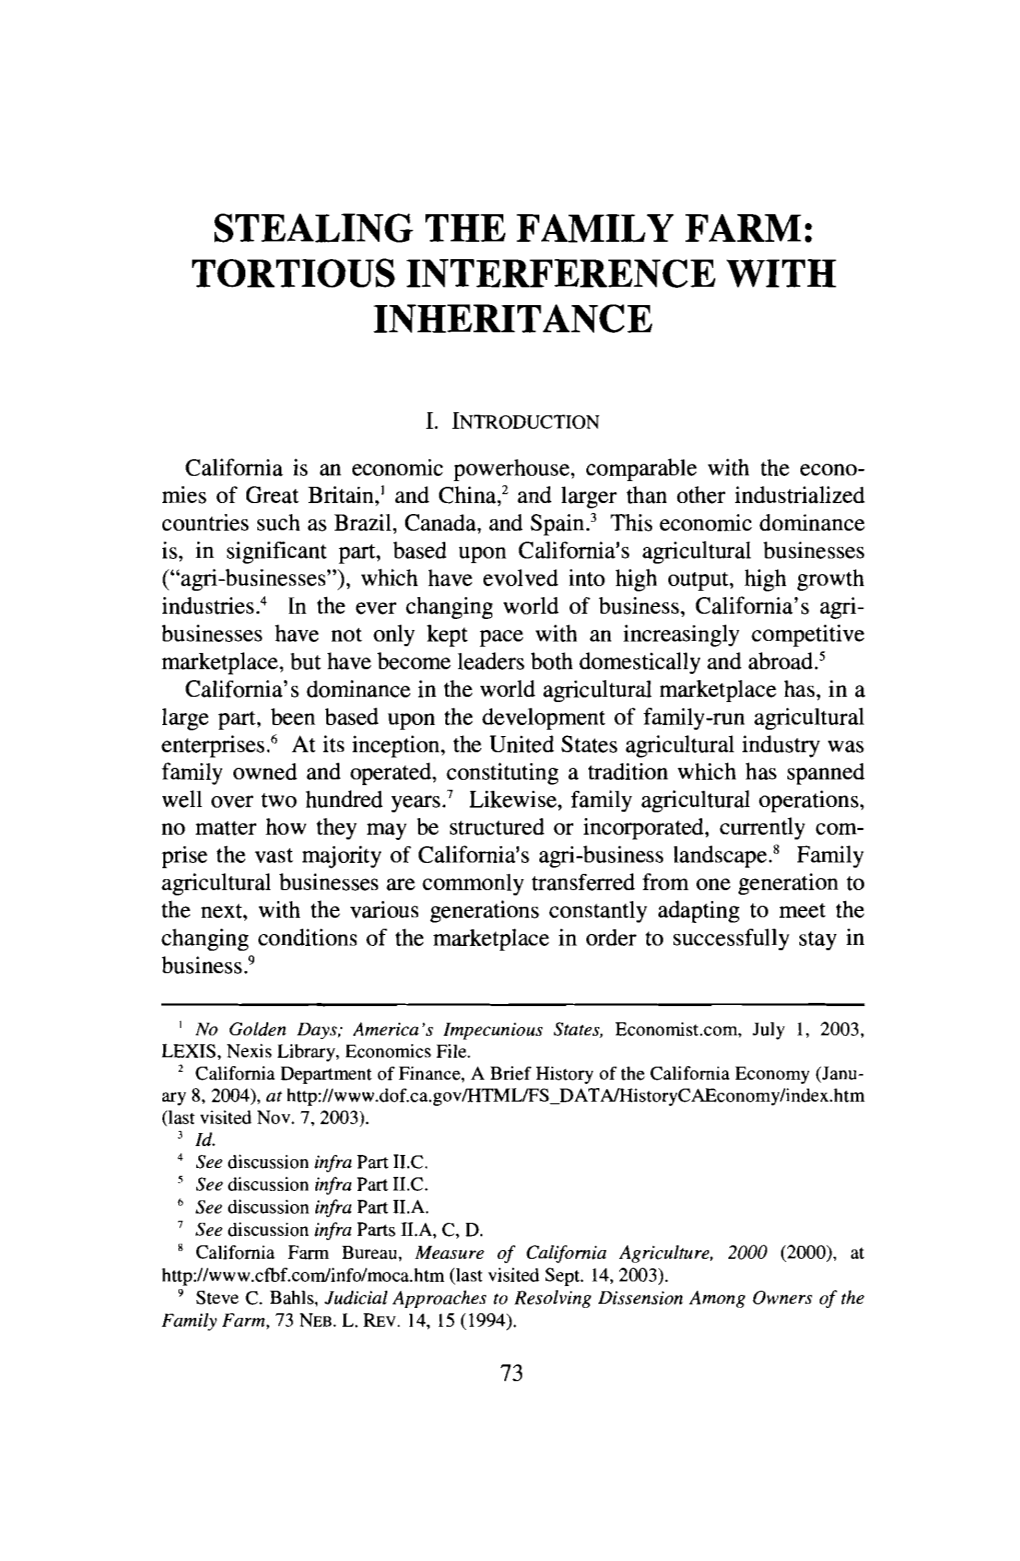 Tortious Interference with Inheritance